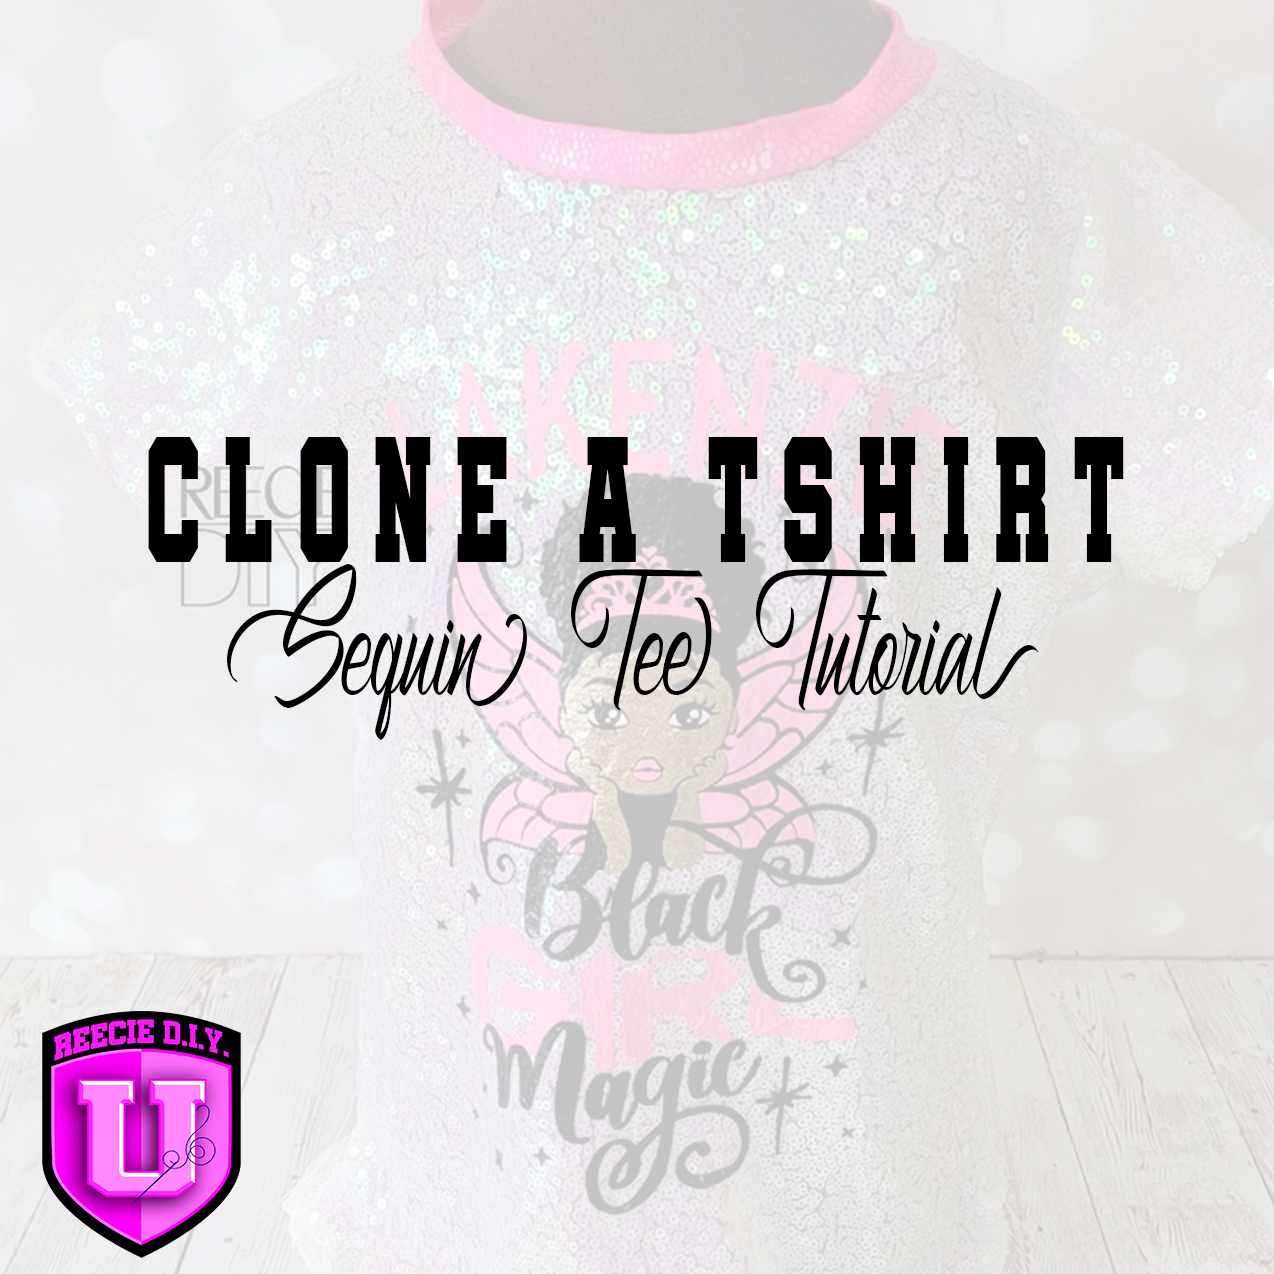 How to Clone a TShirt | Sequin Tee Tutorial